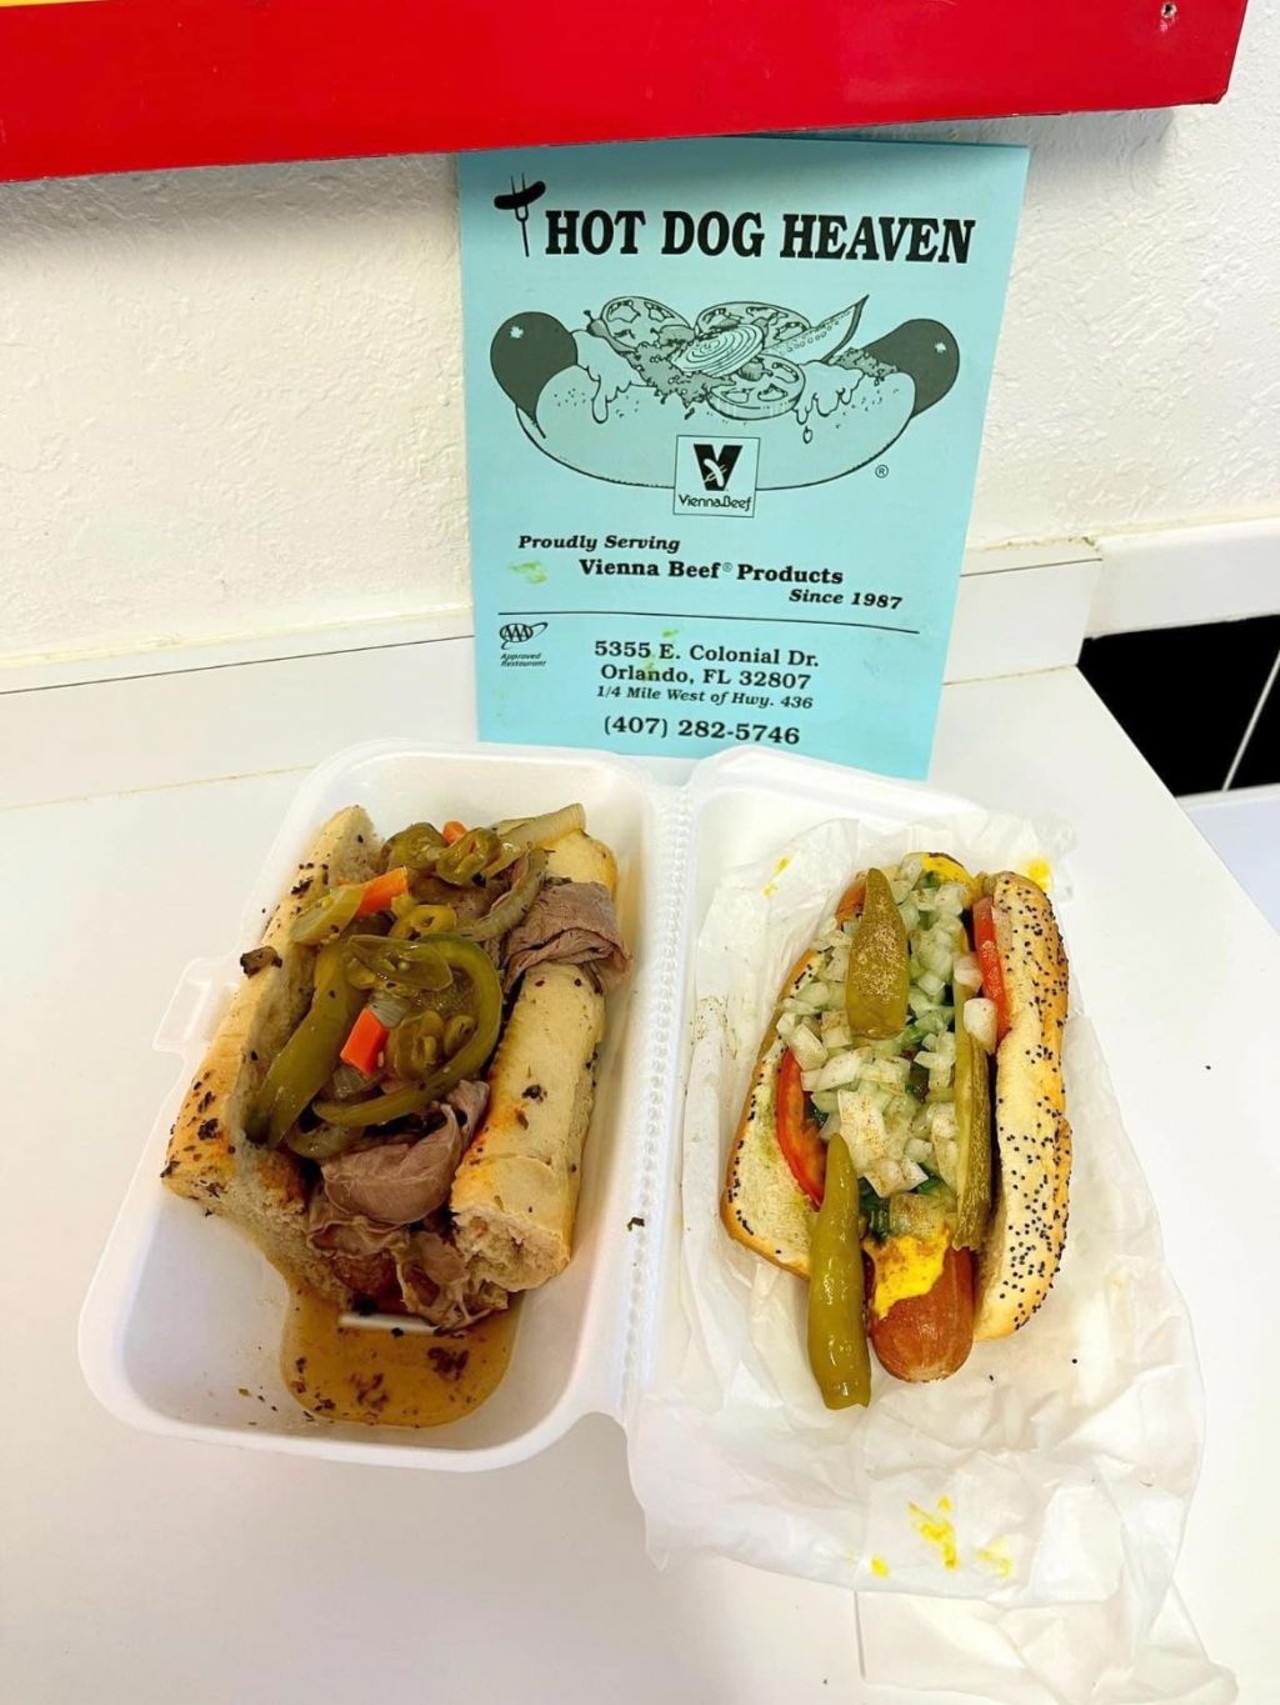 Hot Dog Heaven 
5355 E Colonial Dr, Orlando, FL 32807, 407-282-5746
Hot Dog Heaven has been open since 1987 selling authentic dogs from Chicago.  The dogs are made of 100% pure Vienna beef.
Photo via Hot Dog Heaven/Facebook